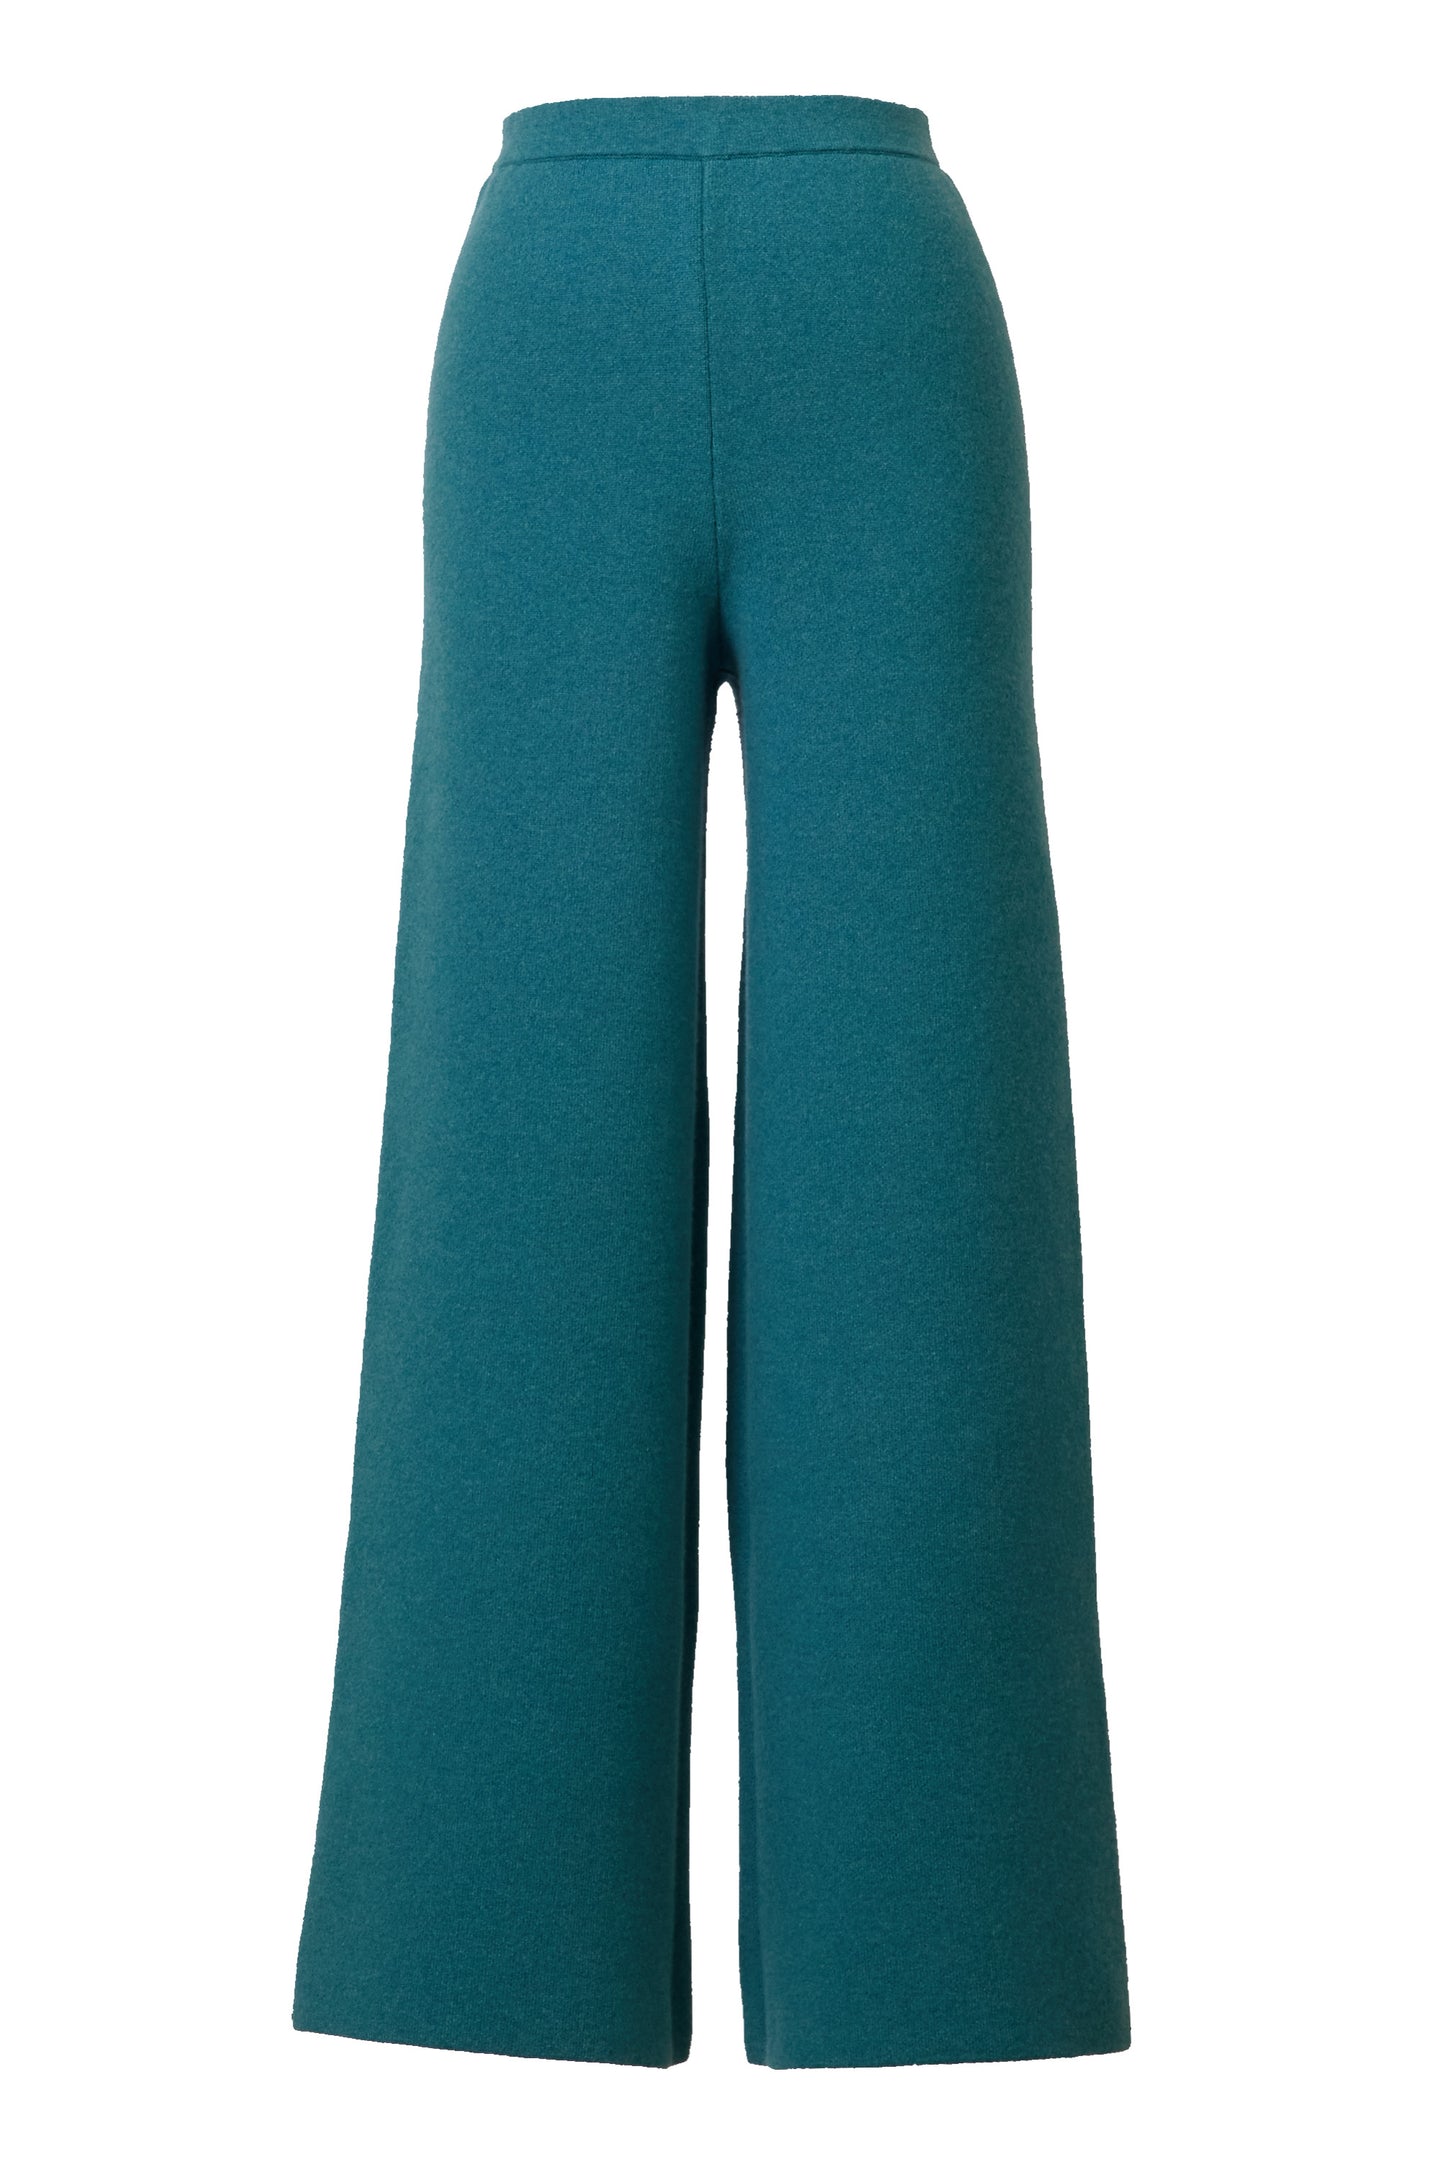 Cashmere Flare Knit Pants | Peacock